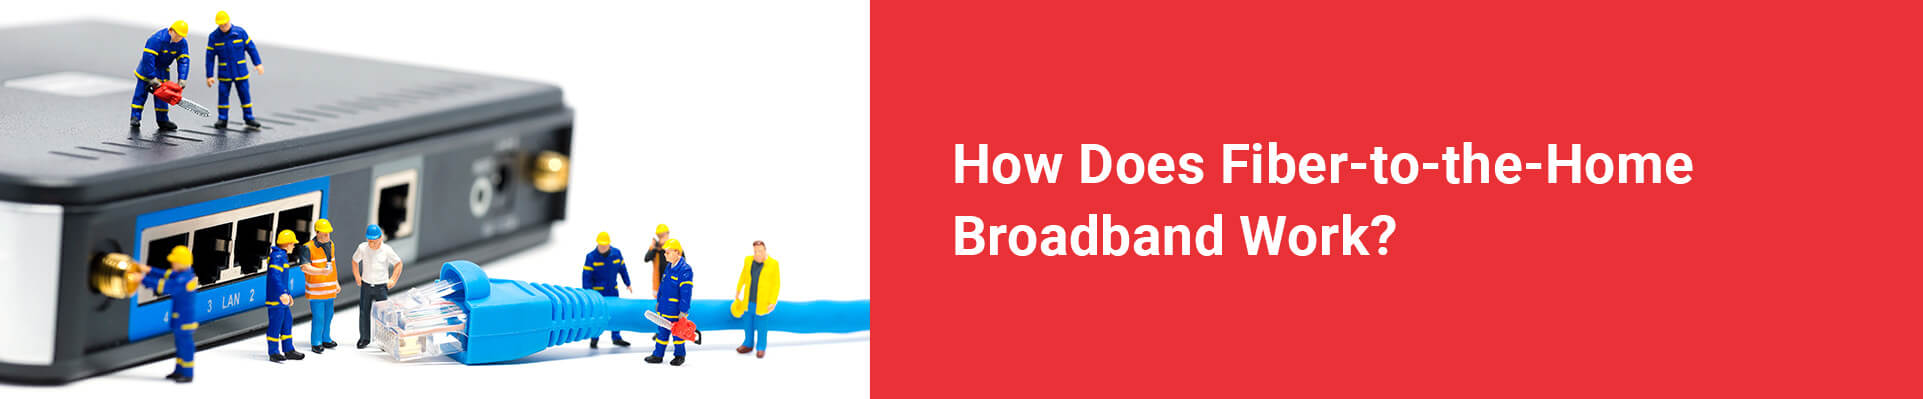 What is Fiber-to-the-Home Broadband Connection?